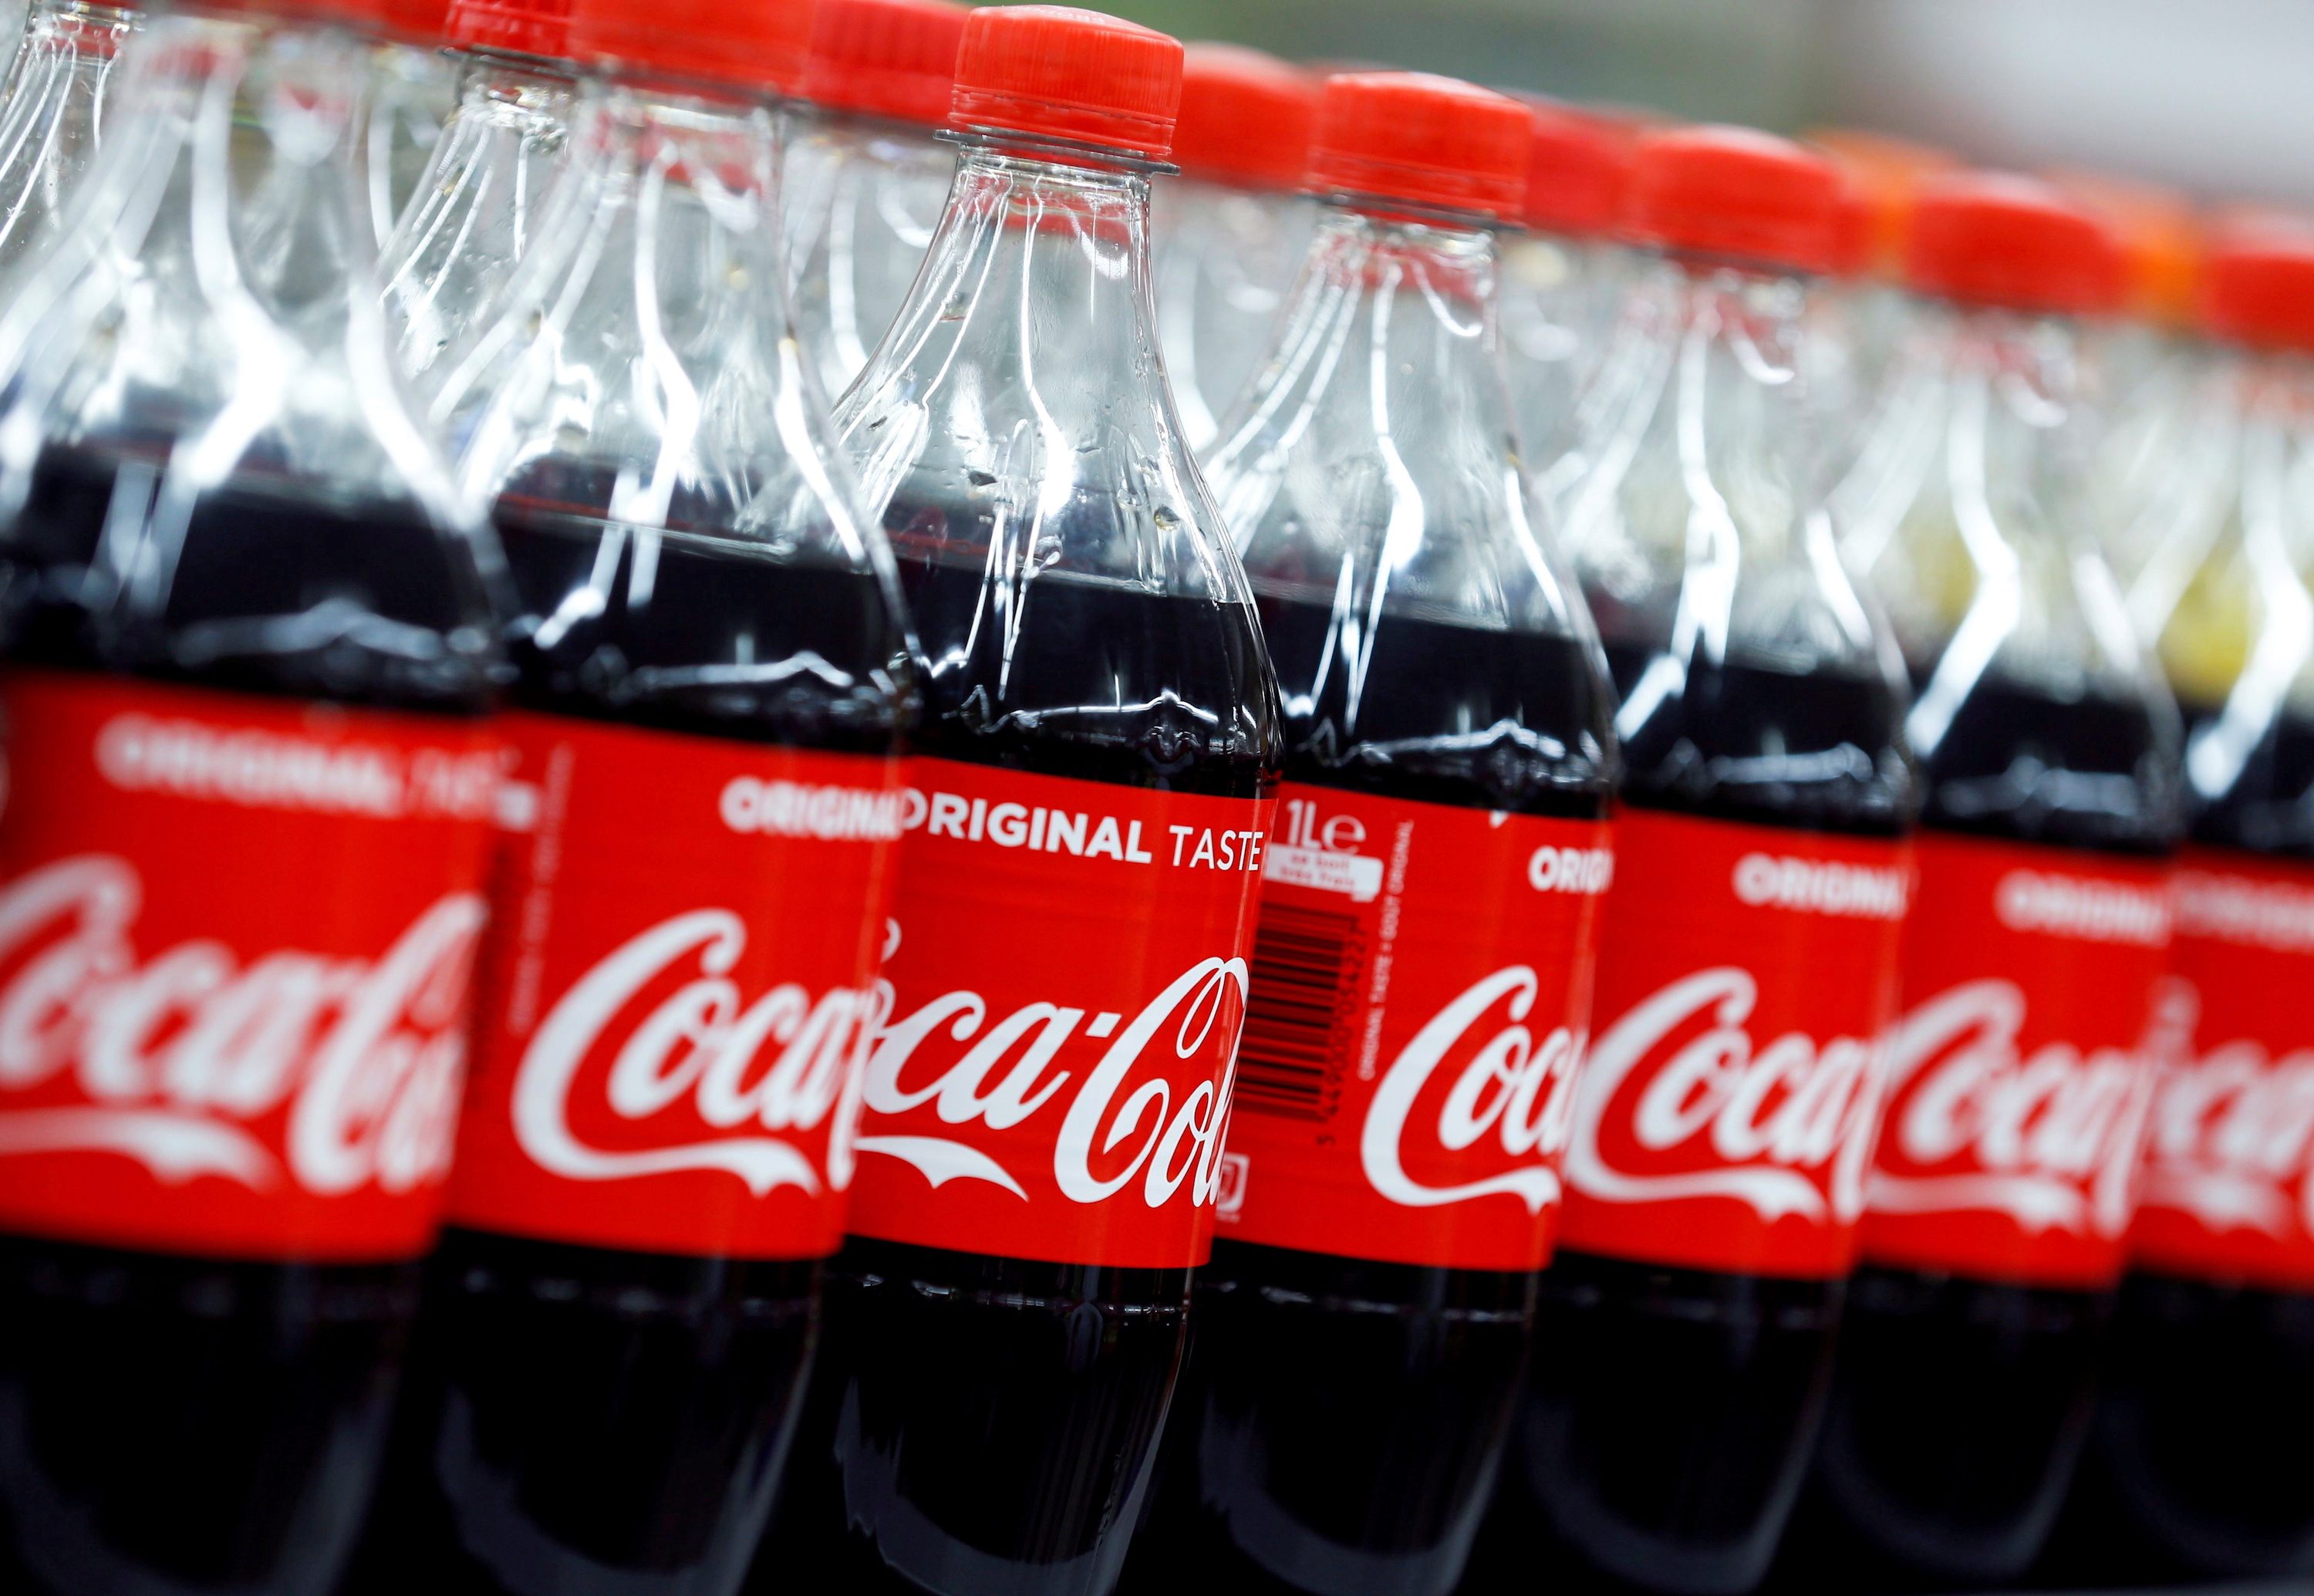 Coca-Cola expects sales growth as vaccines set to allow venues to reopen